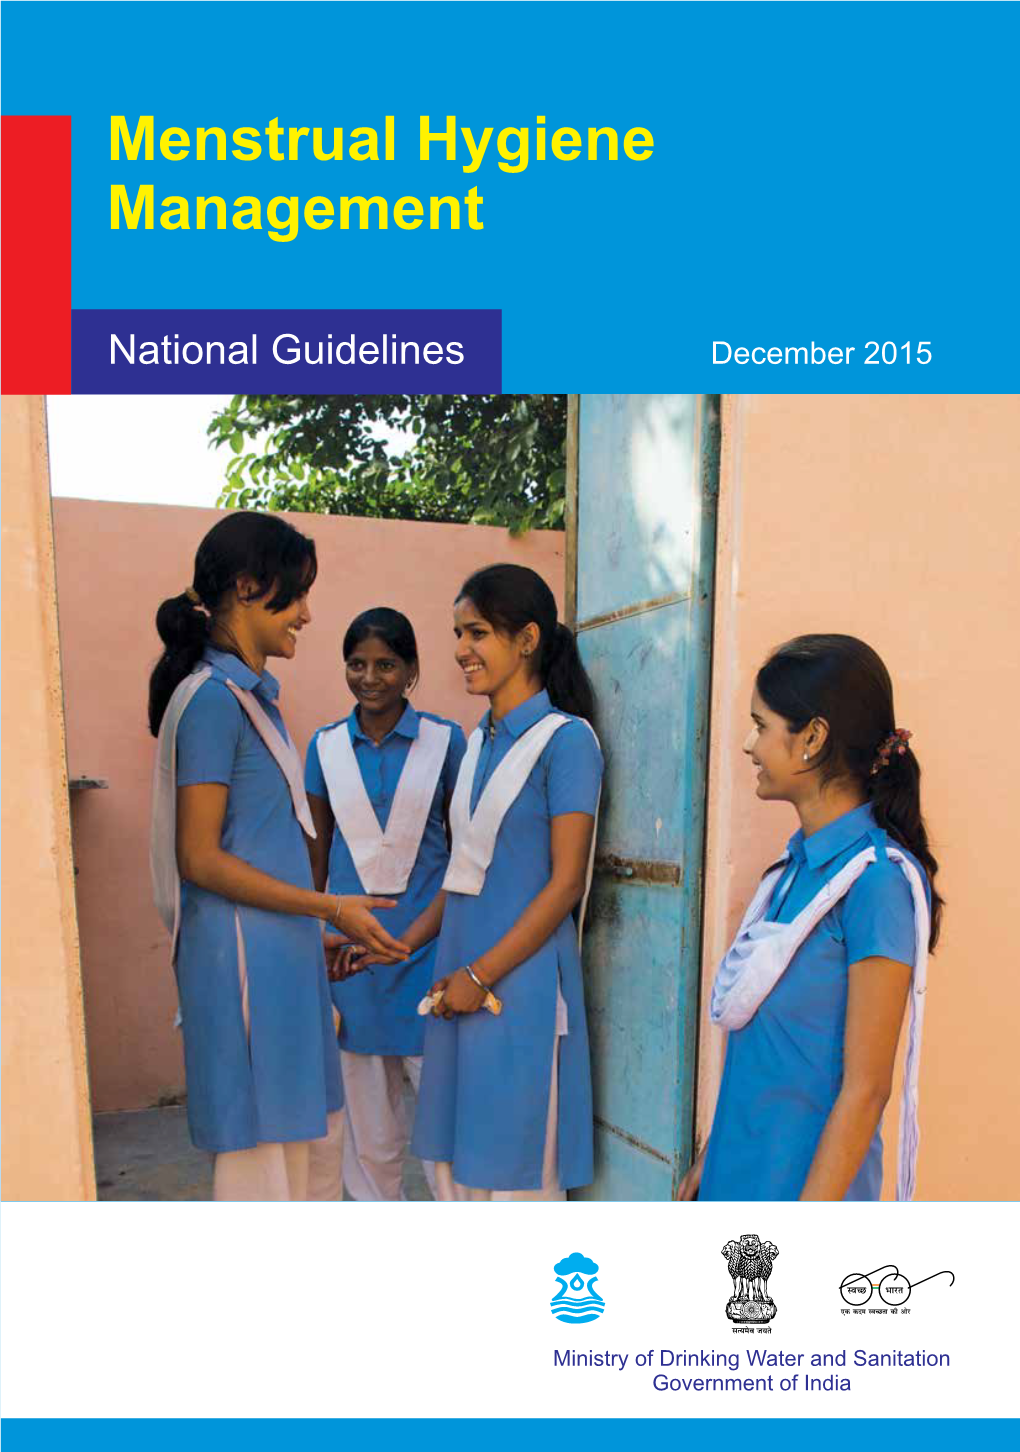 Menstrual Hygiene Management Guideline Is Issued by the Ministry of Drinking Water and Sanitation to Support All Adolescent Girls and Women